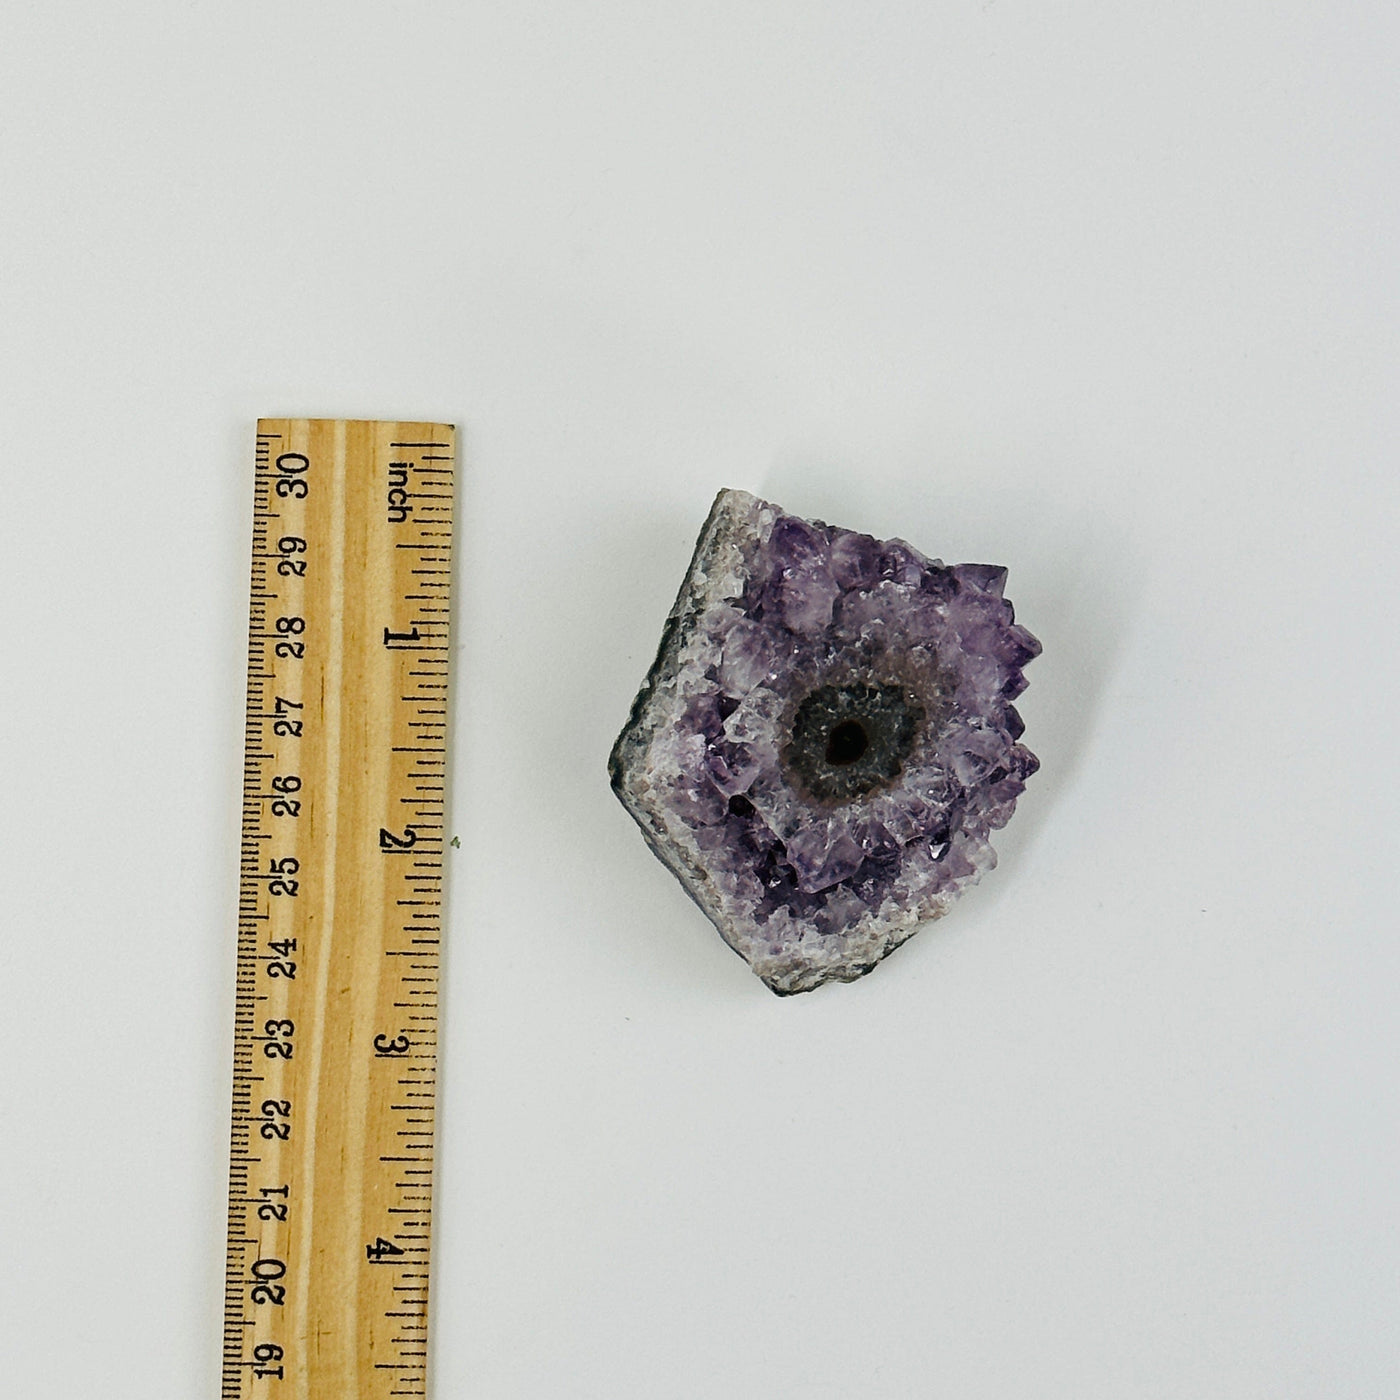 amethyst stalactite cluster next to a ruler for size reference